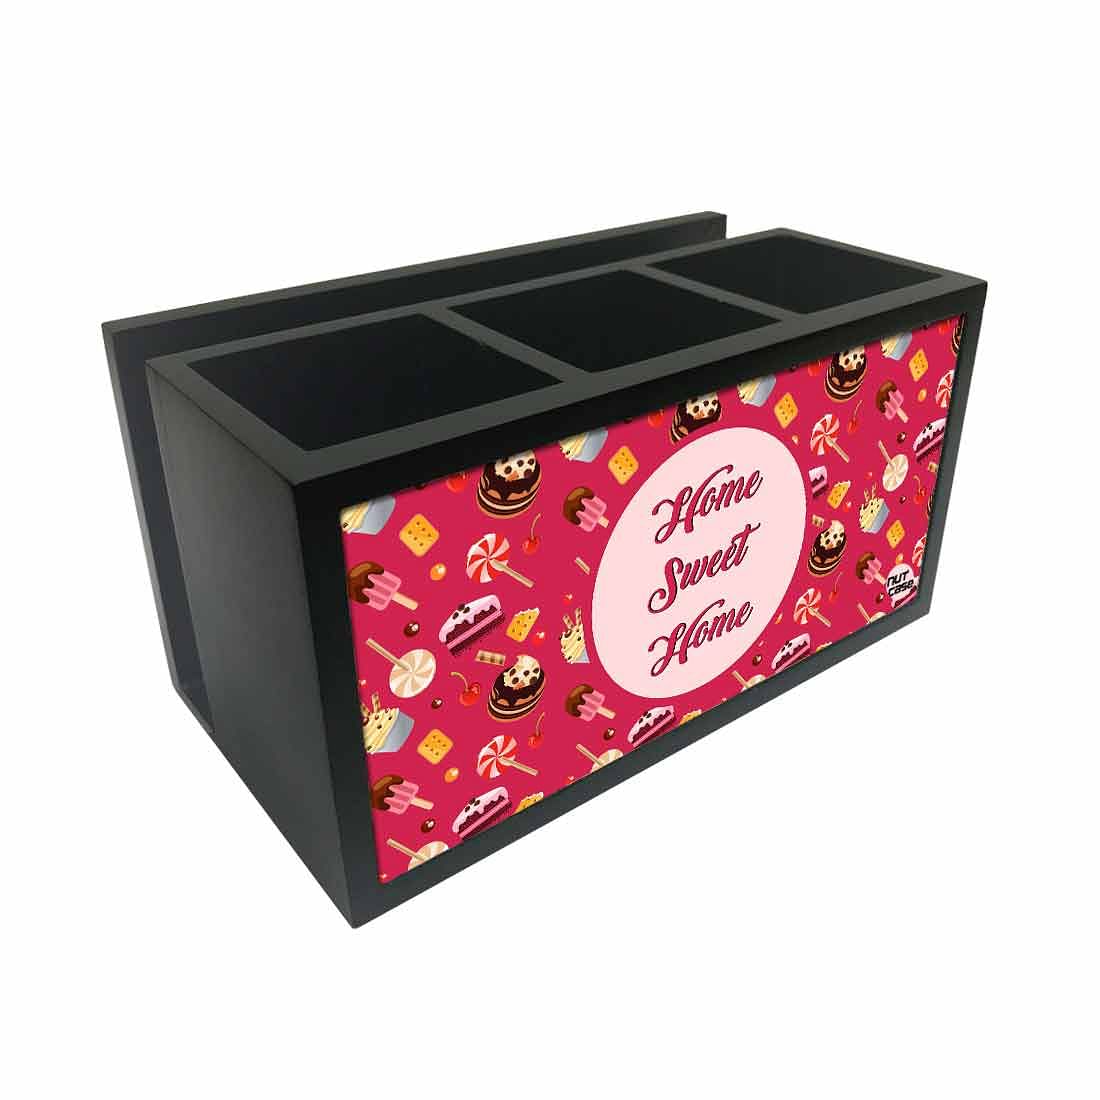 Cutlery Tissue Holder Napkin Stand -  Chocolate Candy Nutcase